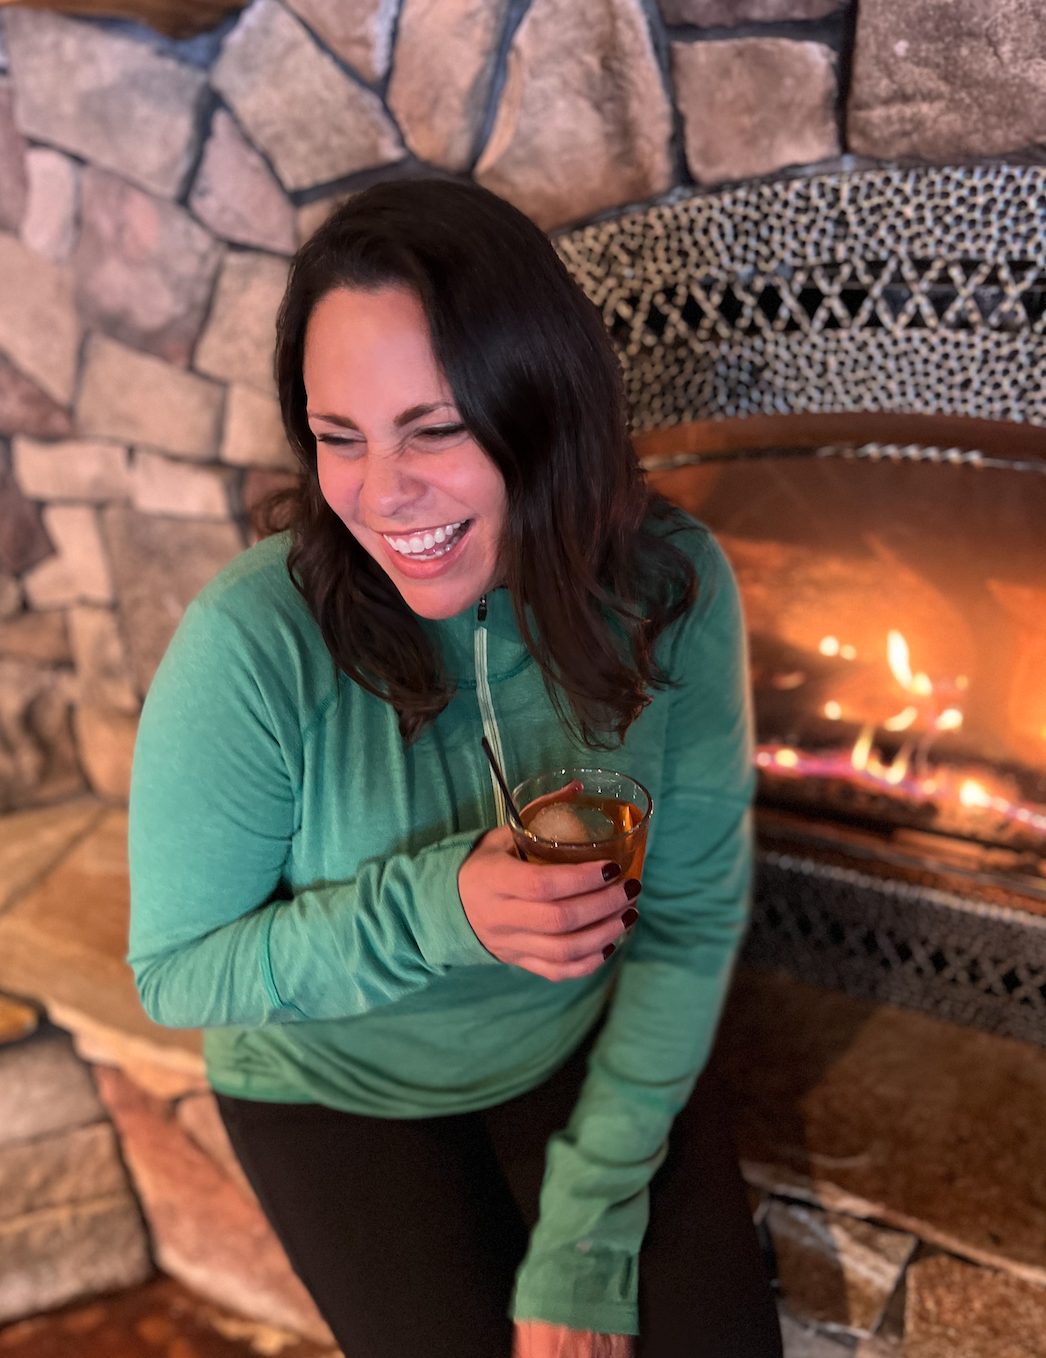 Woman Laughing at Fireplace with an Old Fashioned Drink